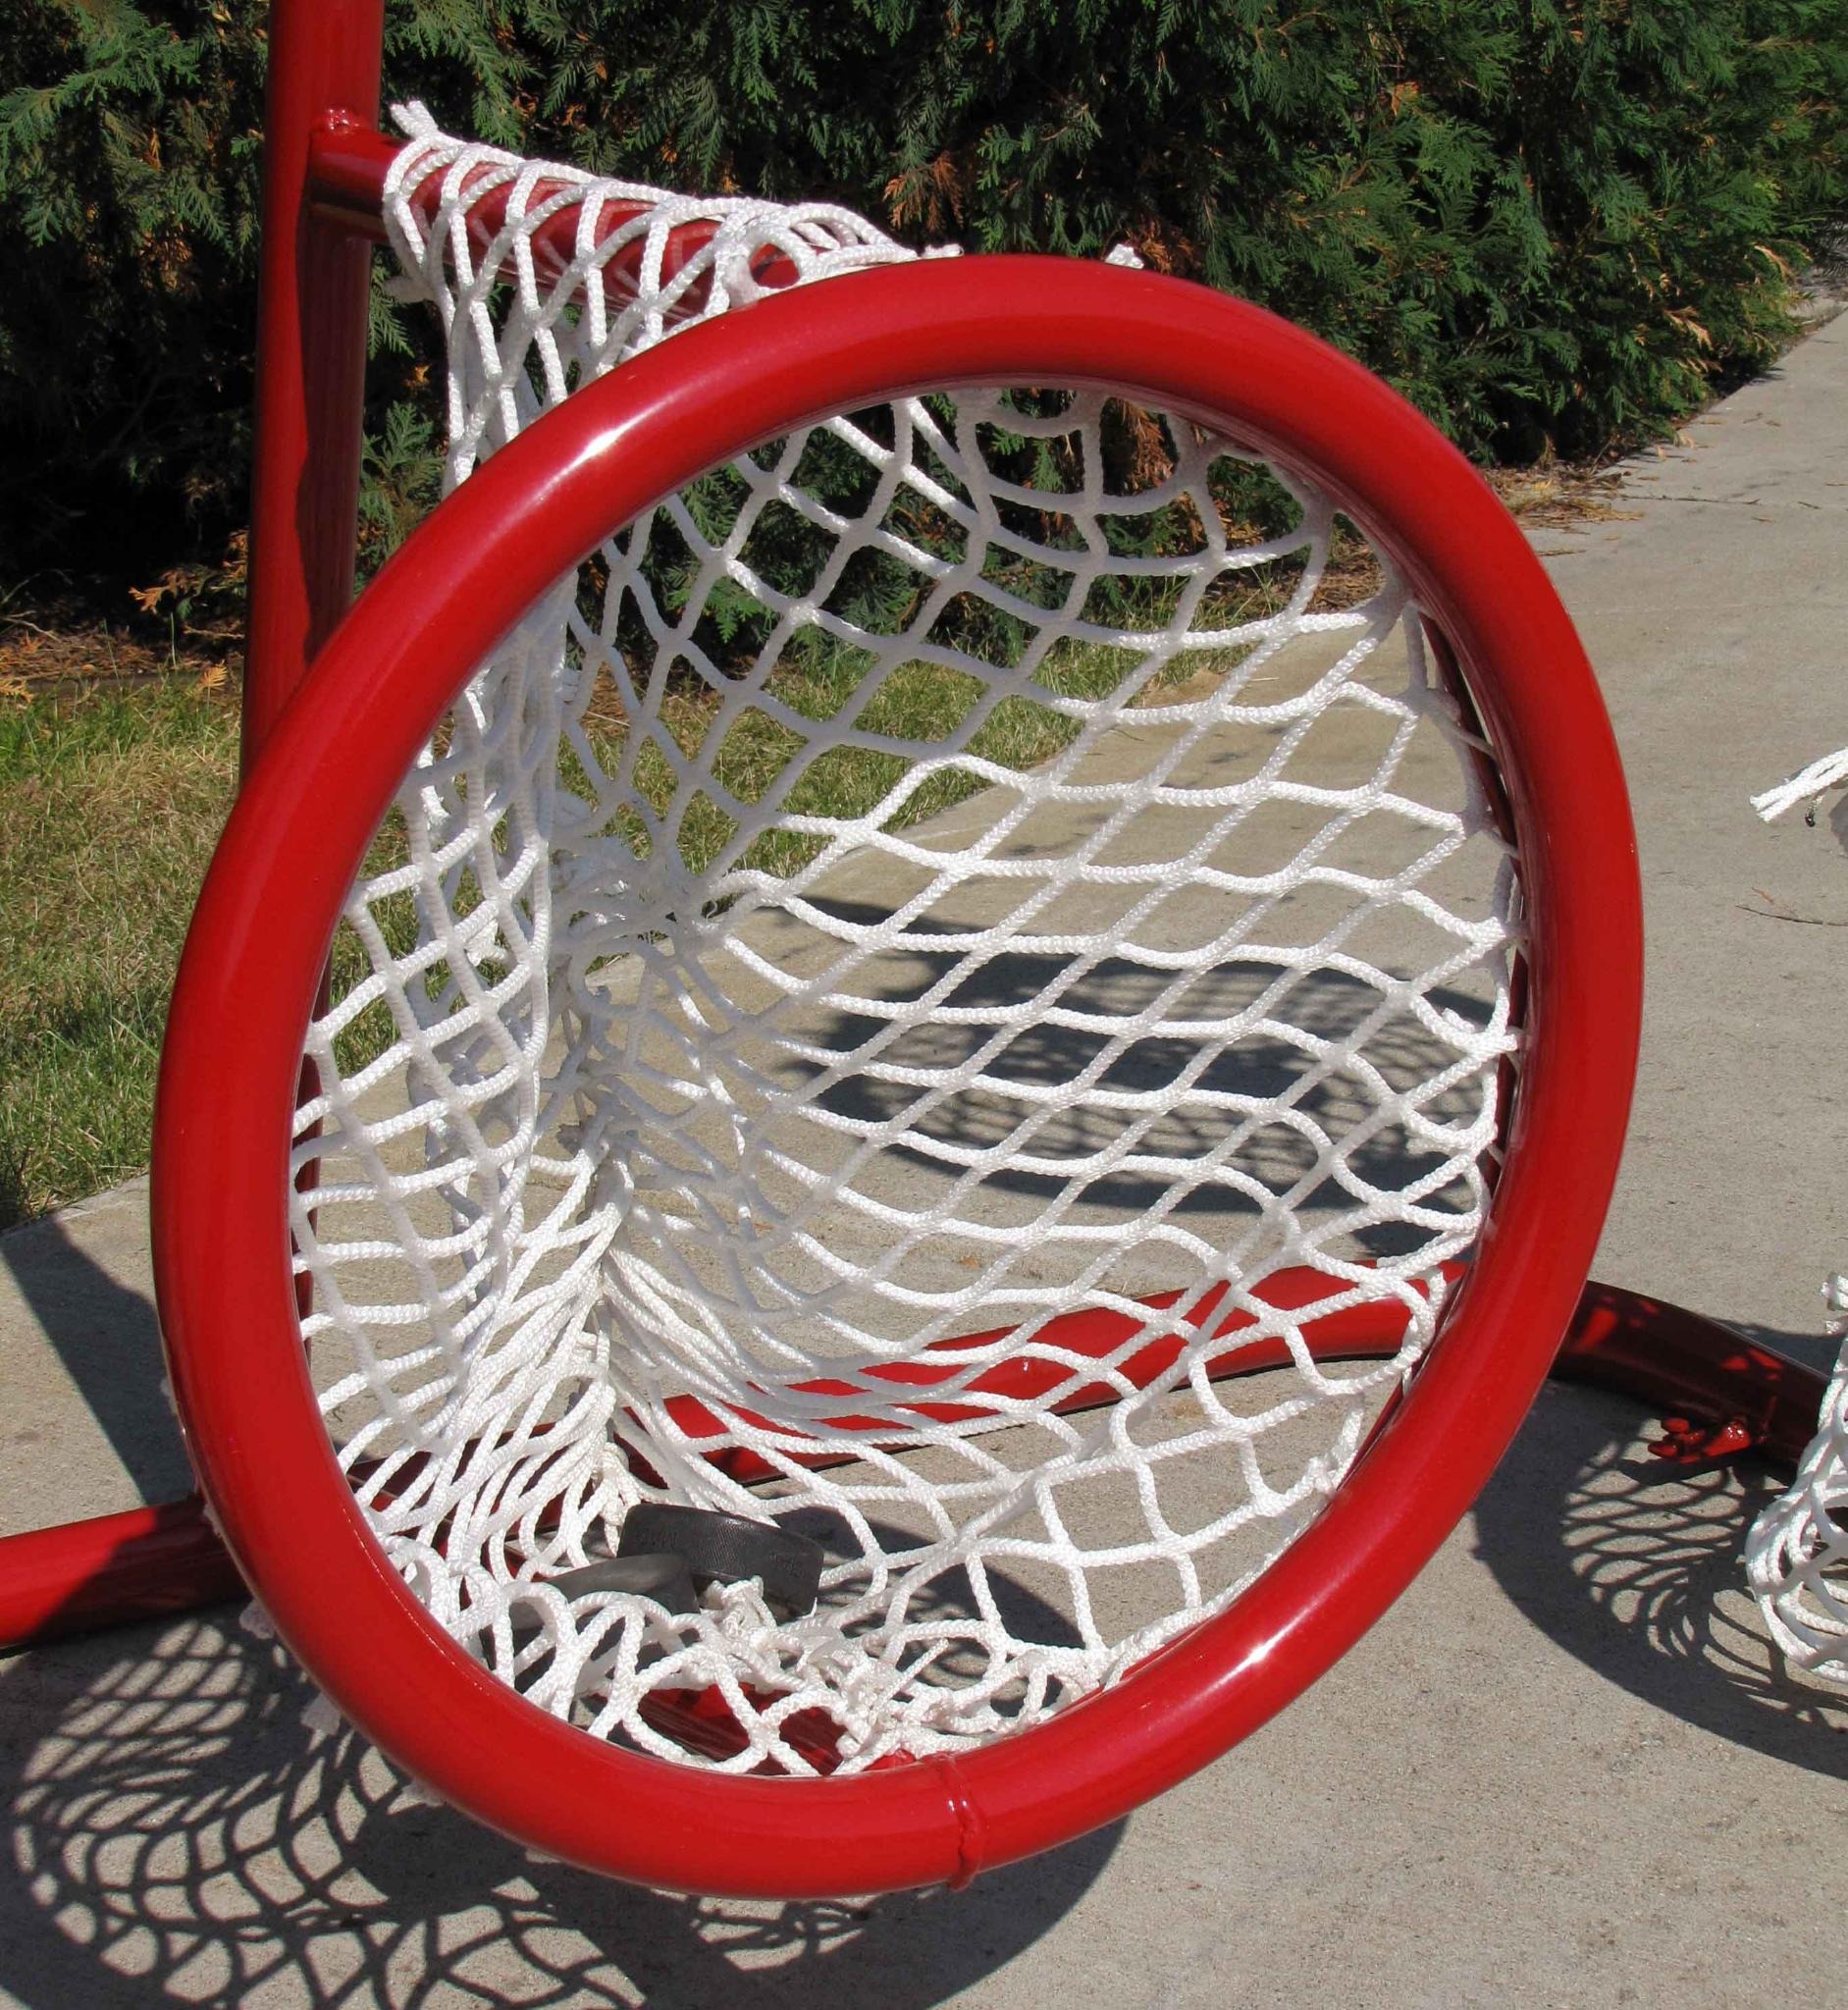 6’ x 4’ Steel Hockey Training Goal Front with Five Circular Shooting Holes; Welded Lacing Bar for Attaching Net; For Hockey Shooting Practice and Accuracy.